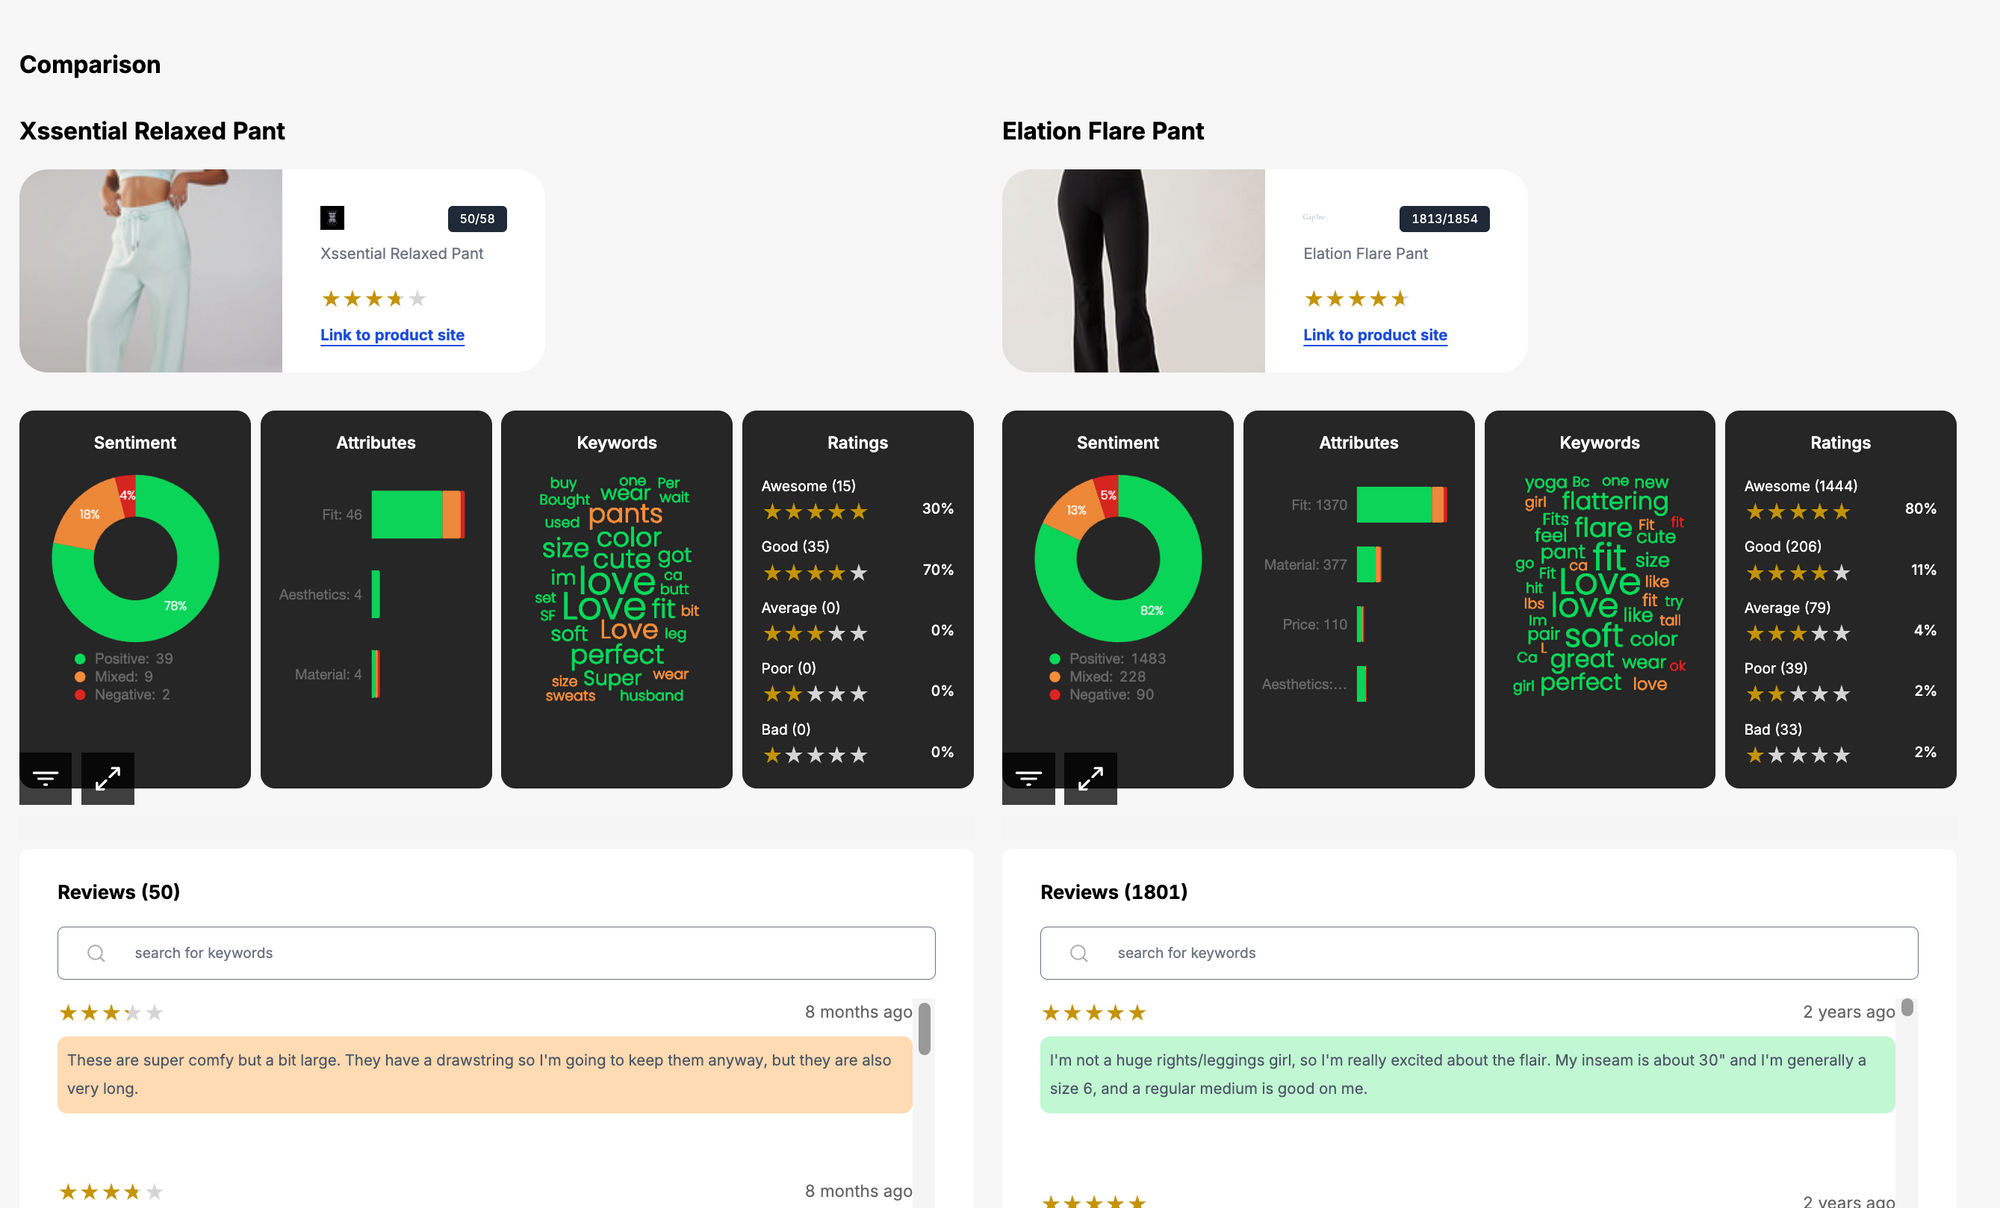 With Woven Insights, you can compare products of competitors with respect to Customer Sentiment around attributes such as price, fit, aesthetics and material, Common themes in reviews and more.